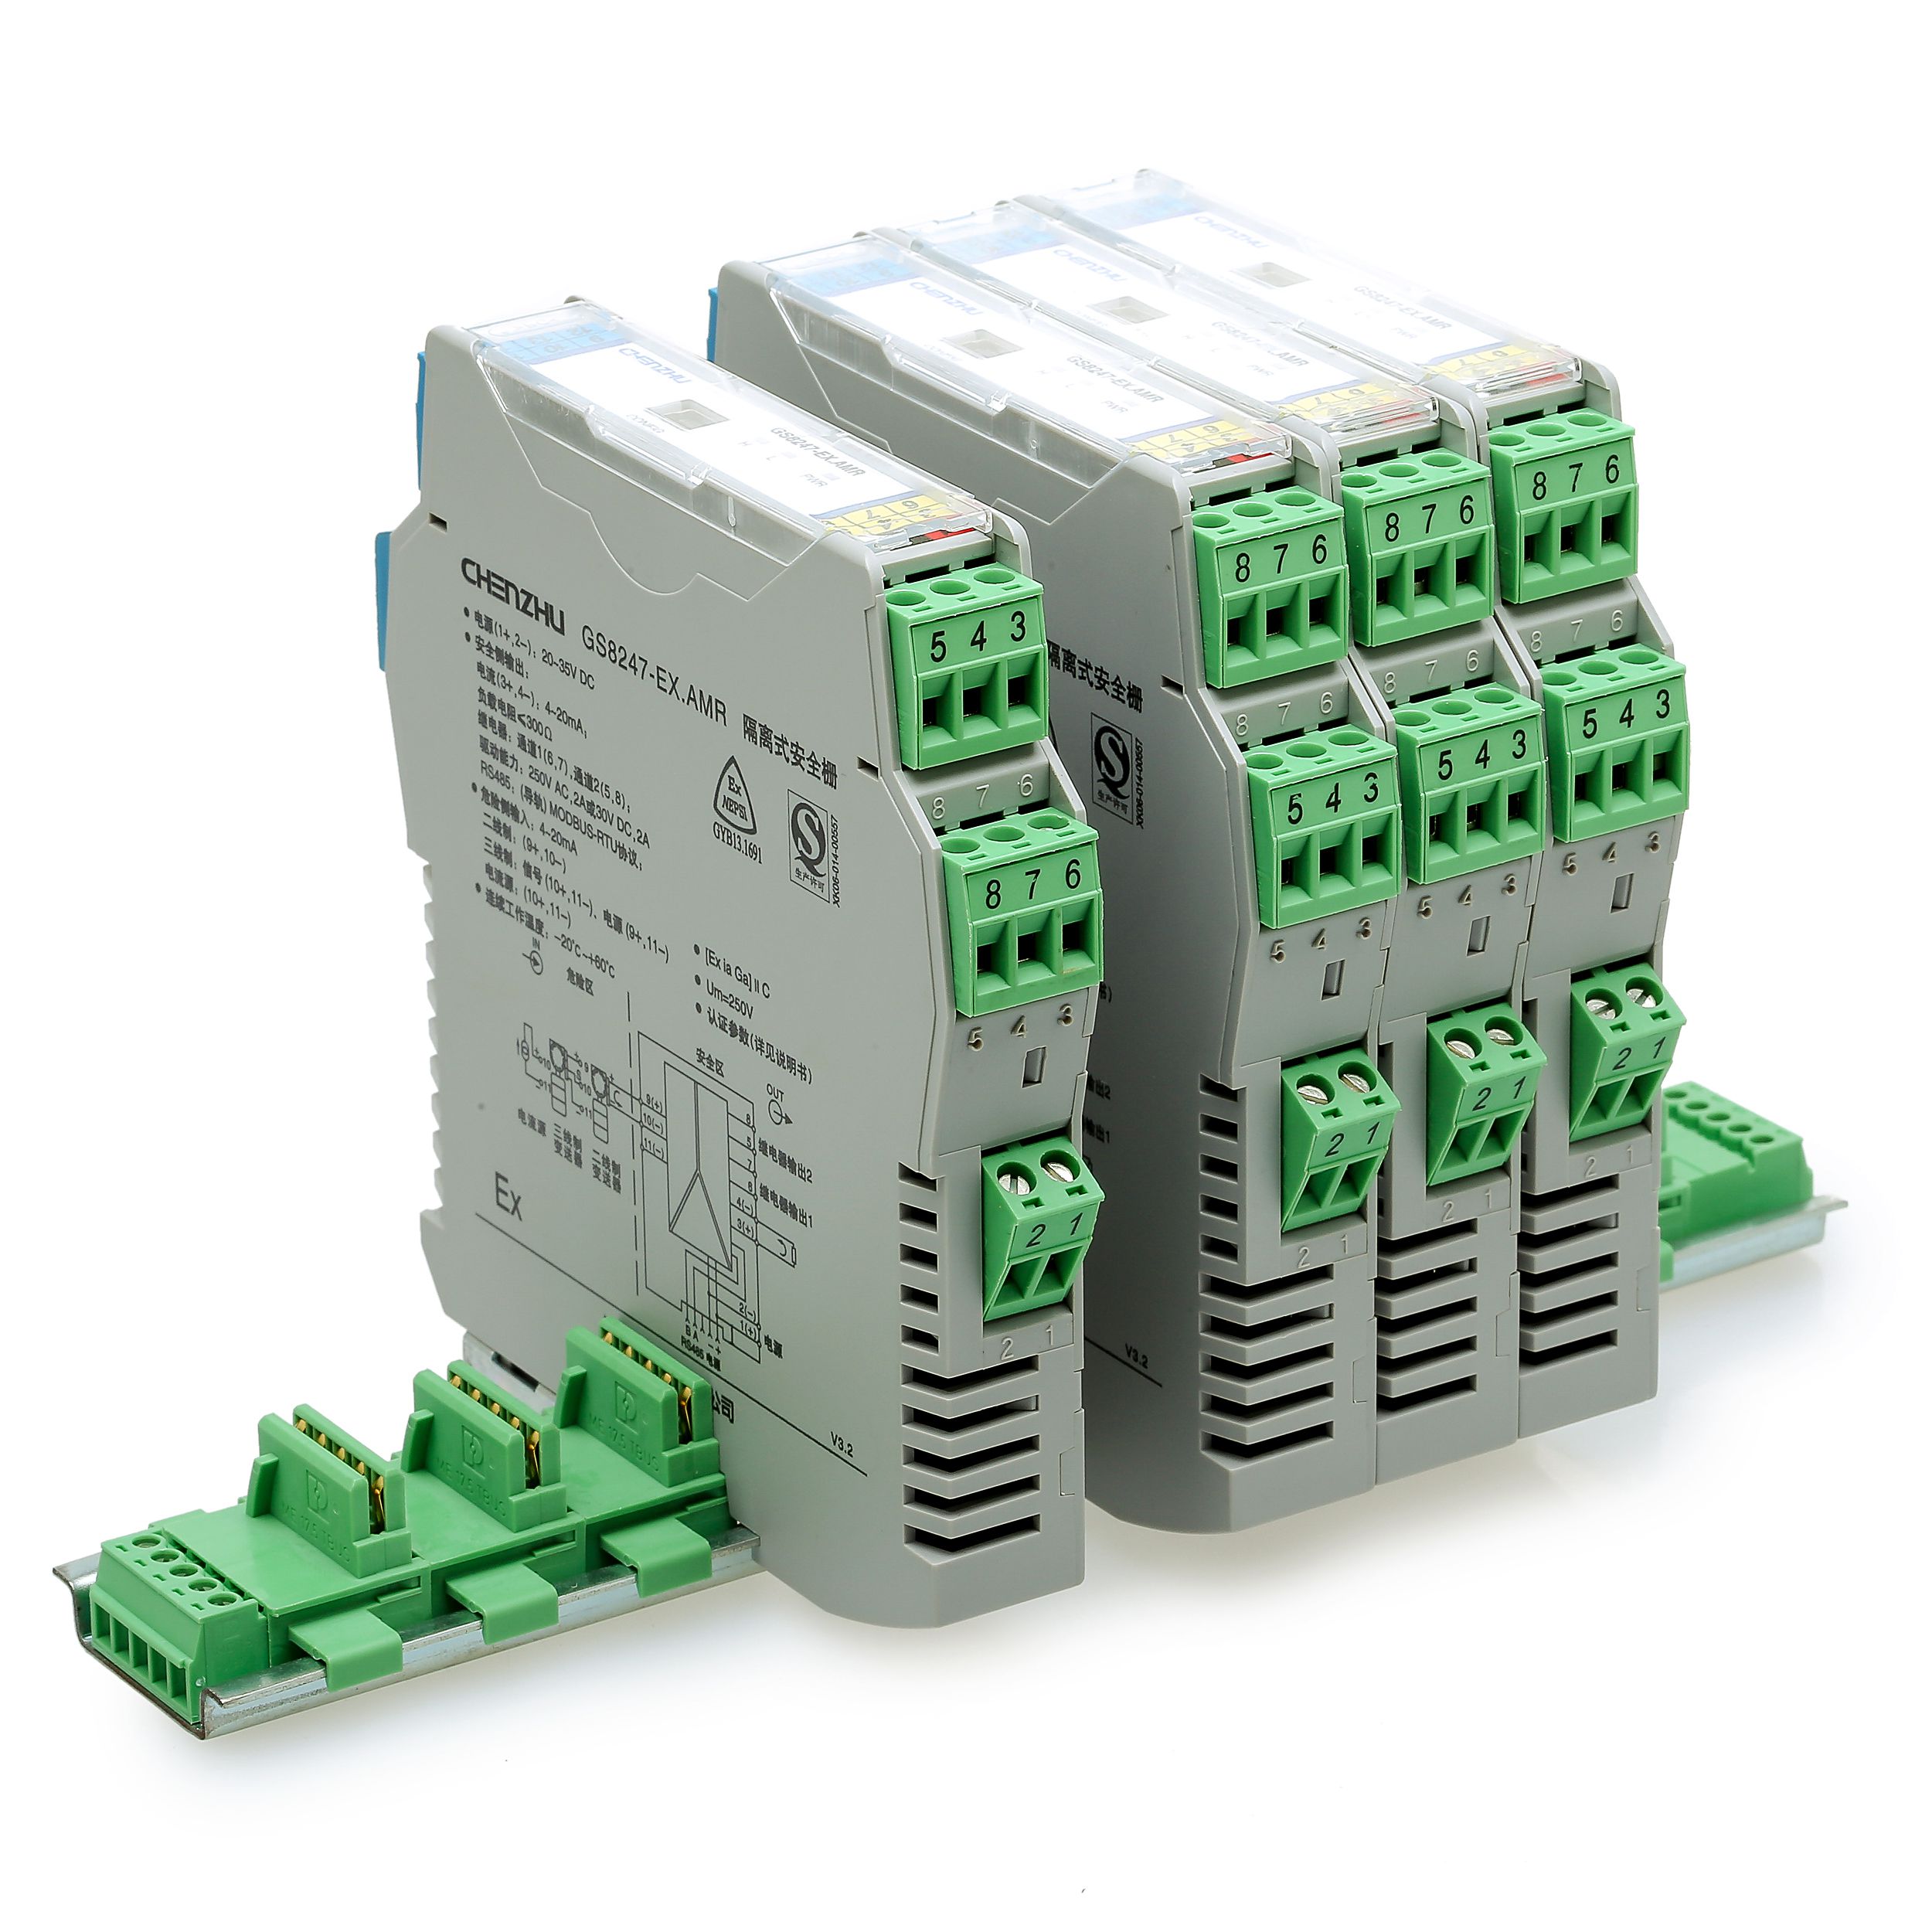 RS-485 half duplex input,RS-485 half duplex output,Isolated Barrier(1 channel)